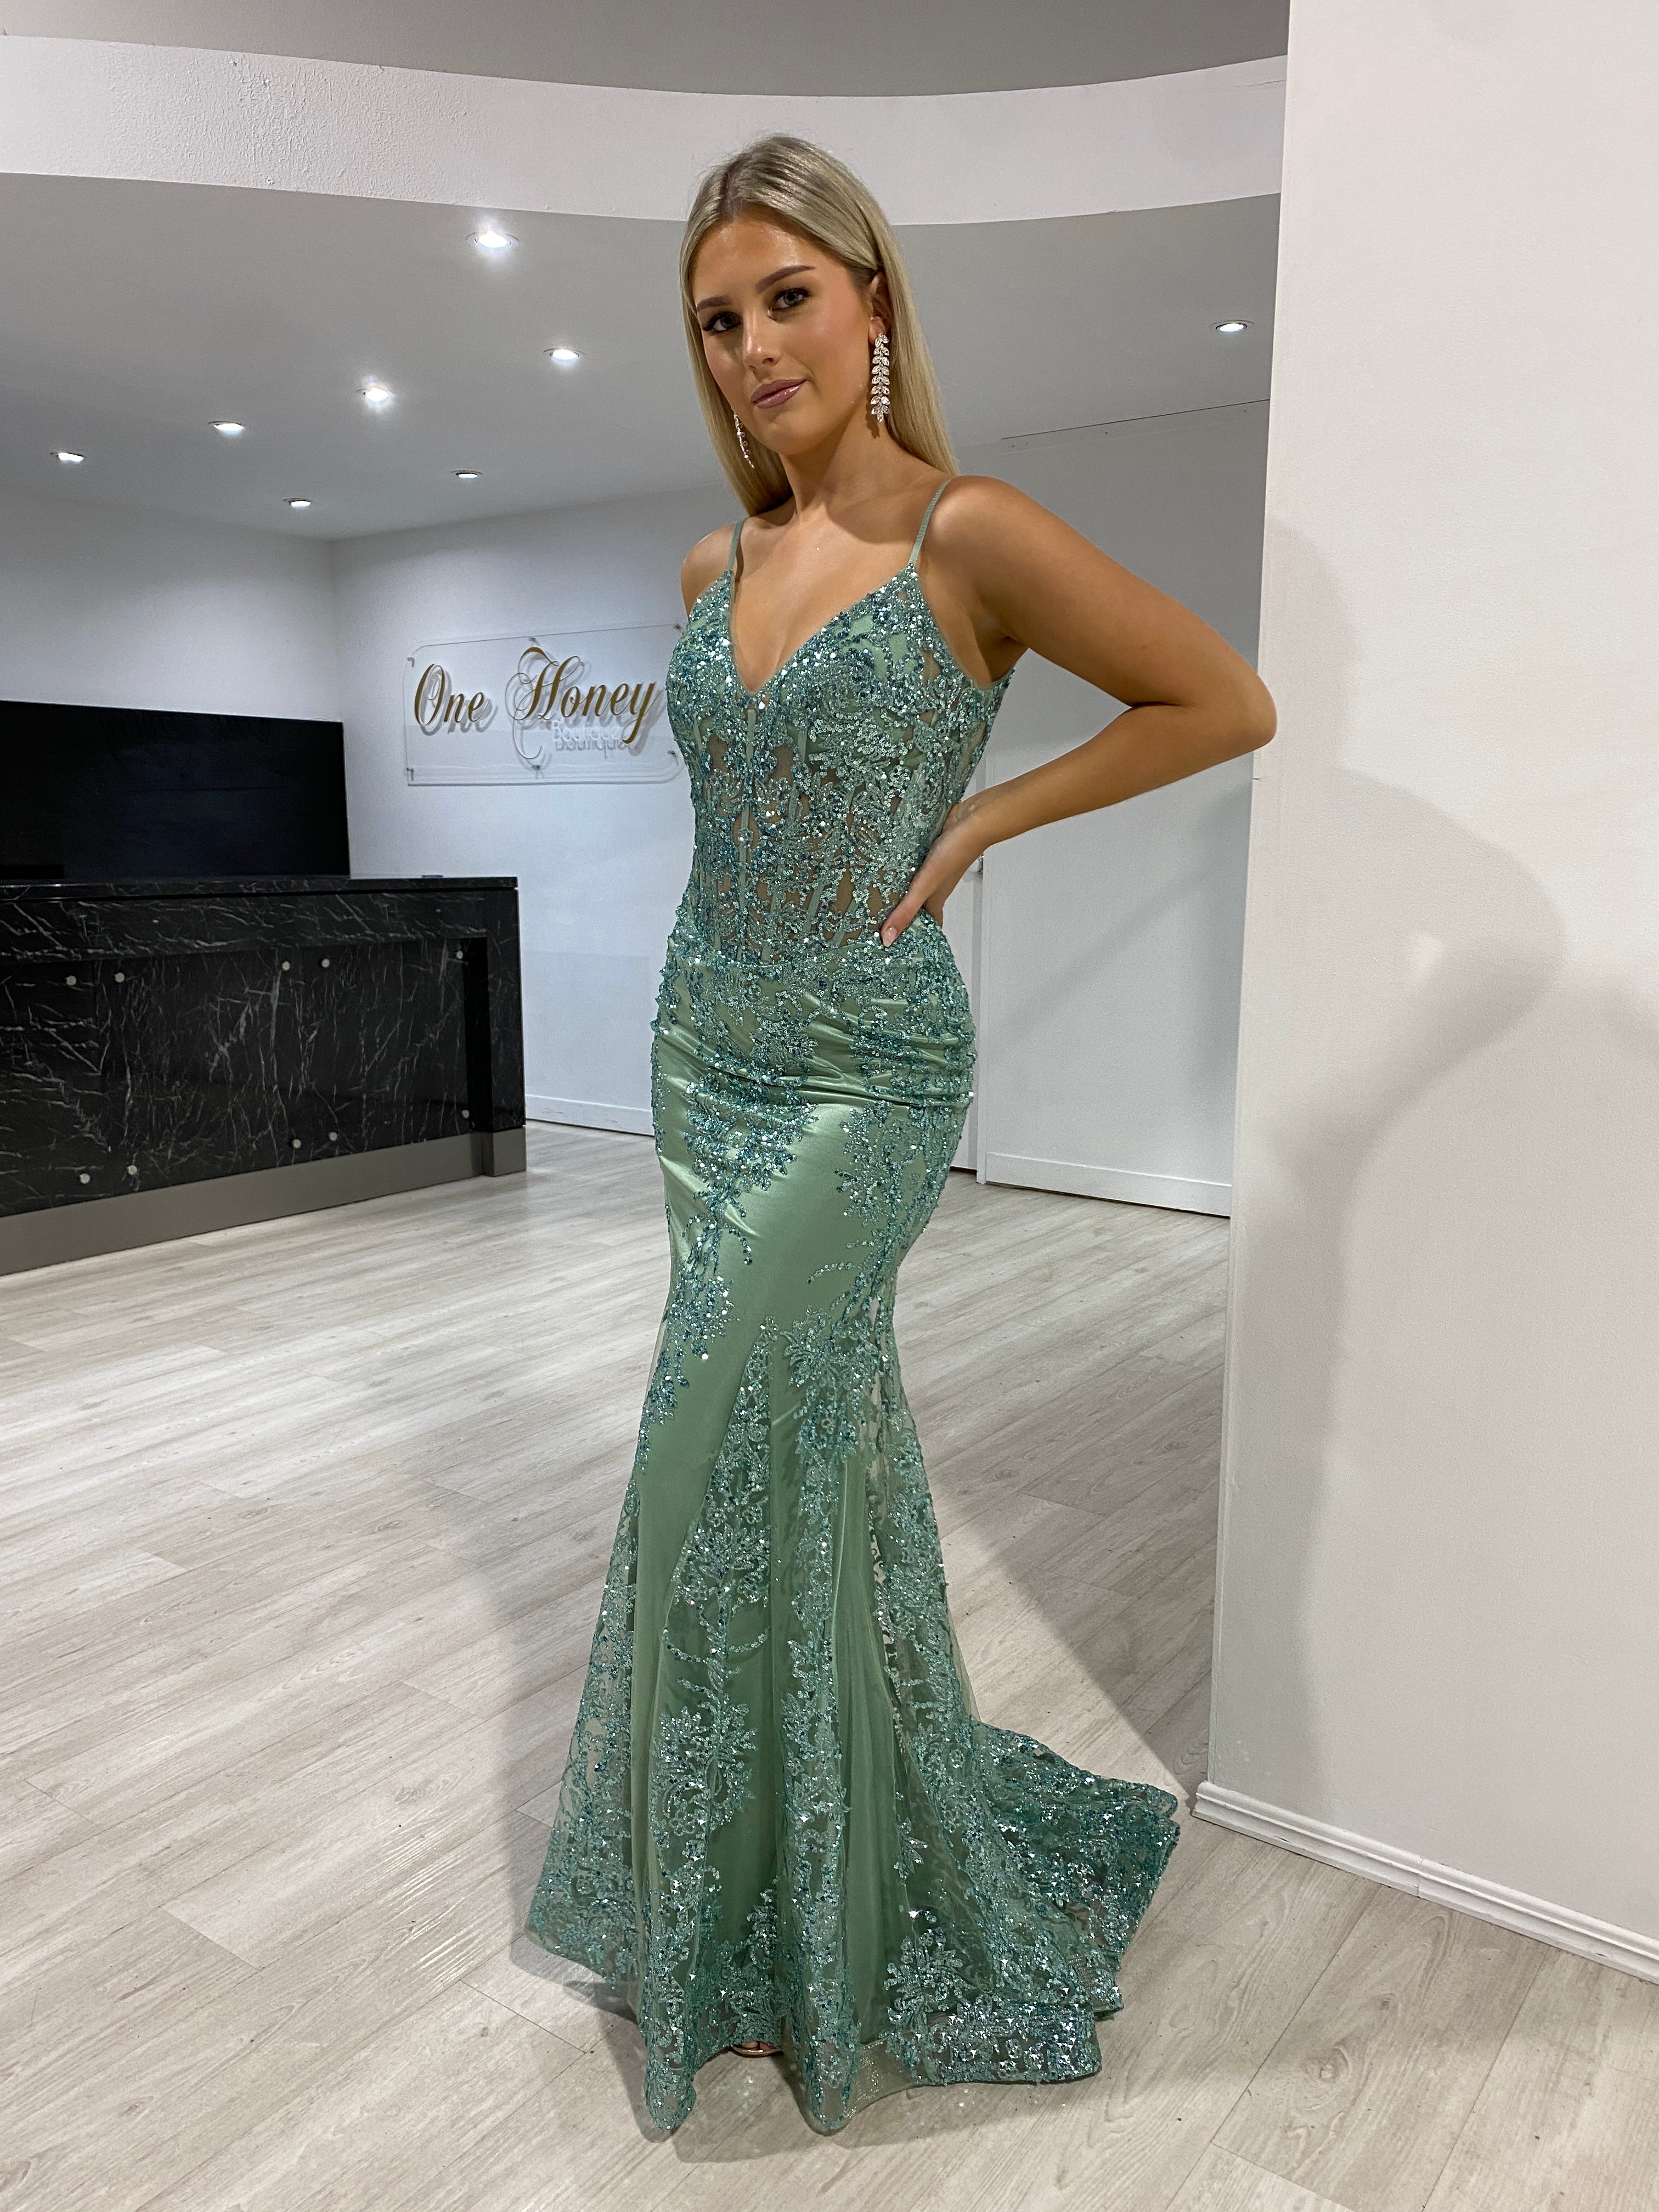 Honey Couture CAROLE Sage Green Sequin Corset Mermaid Formal Gown Dress